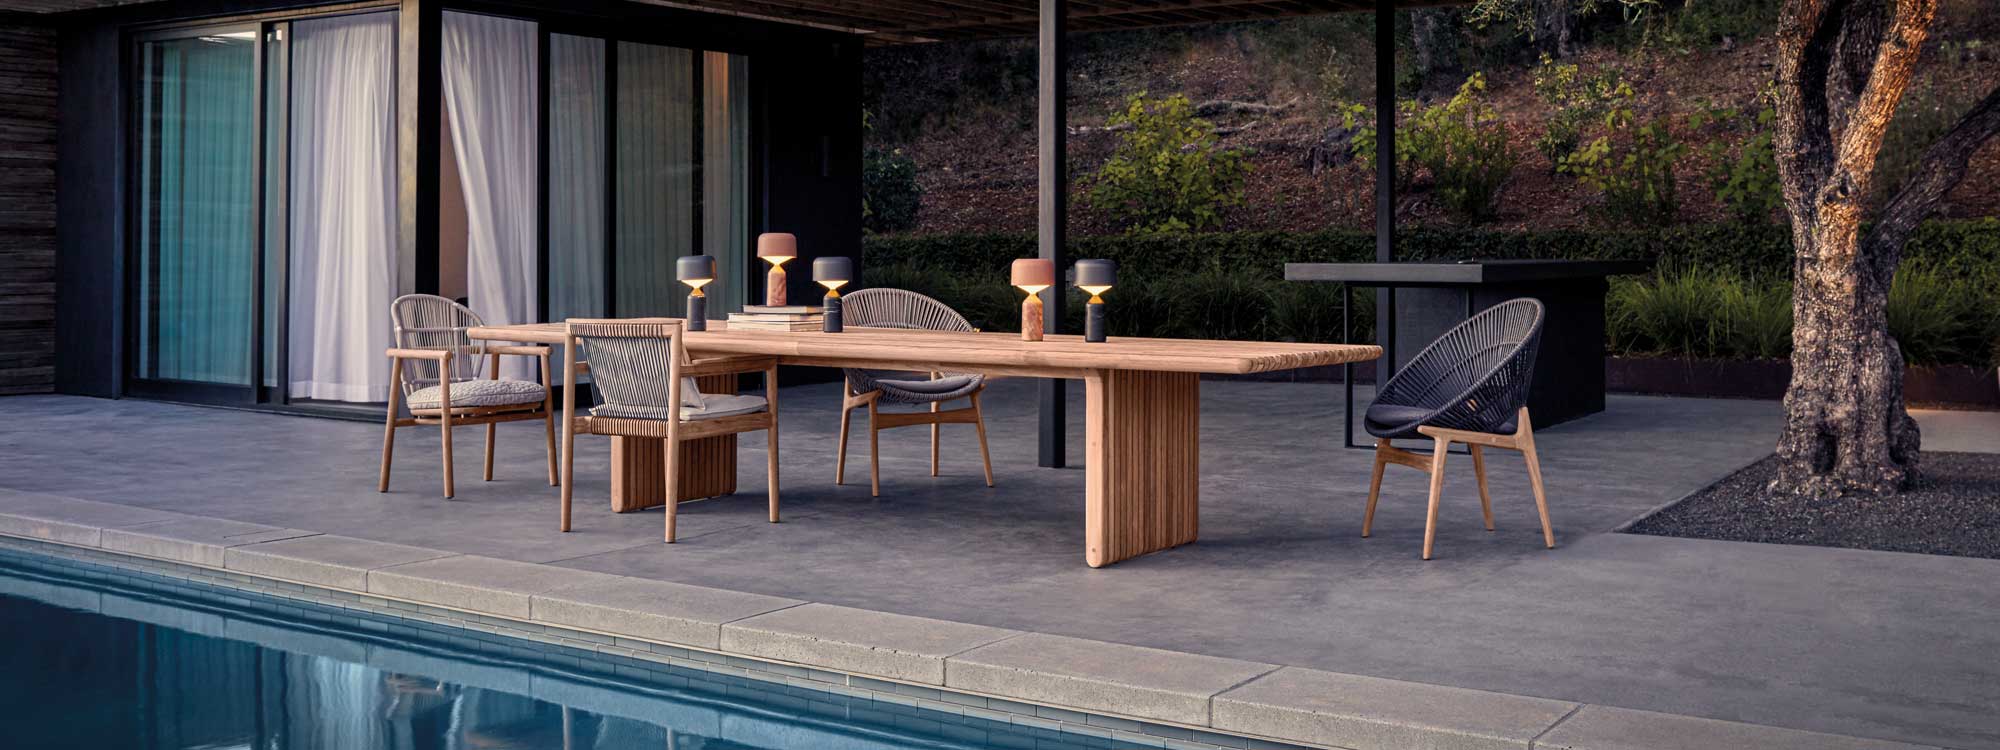 Image of Gloster Deck linear teak table on poolside with different Gloster garden chairs